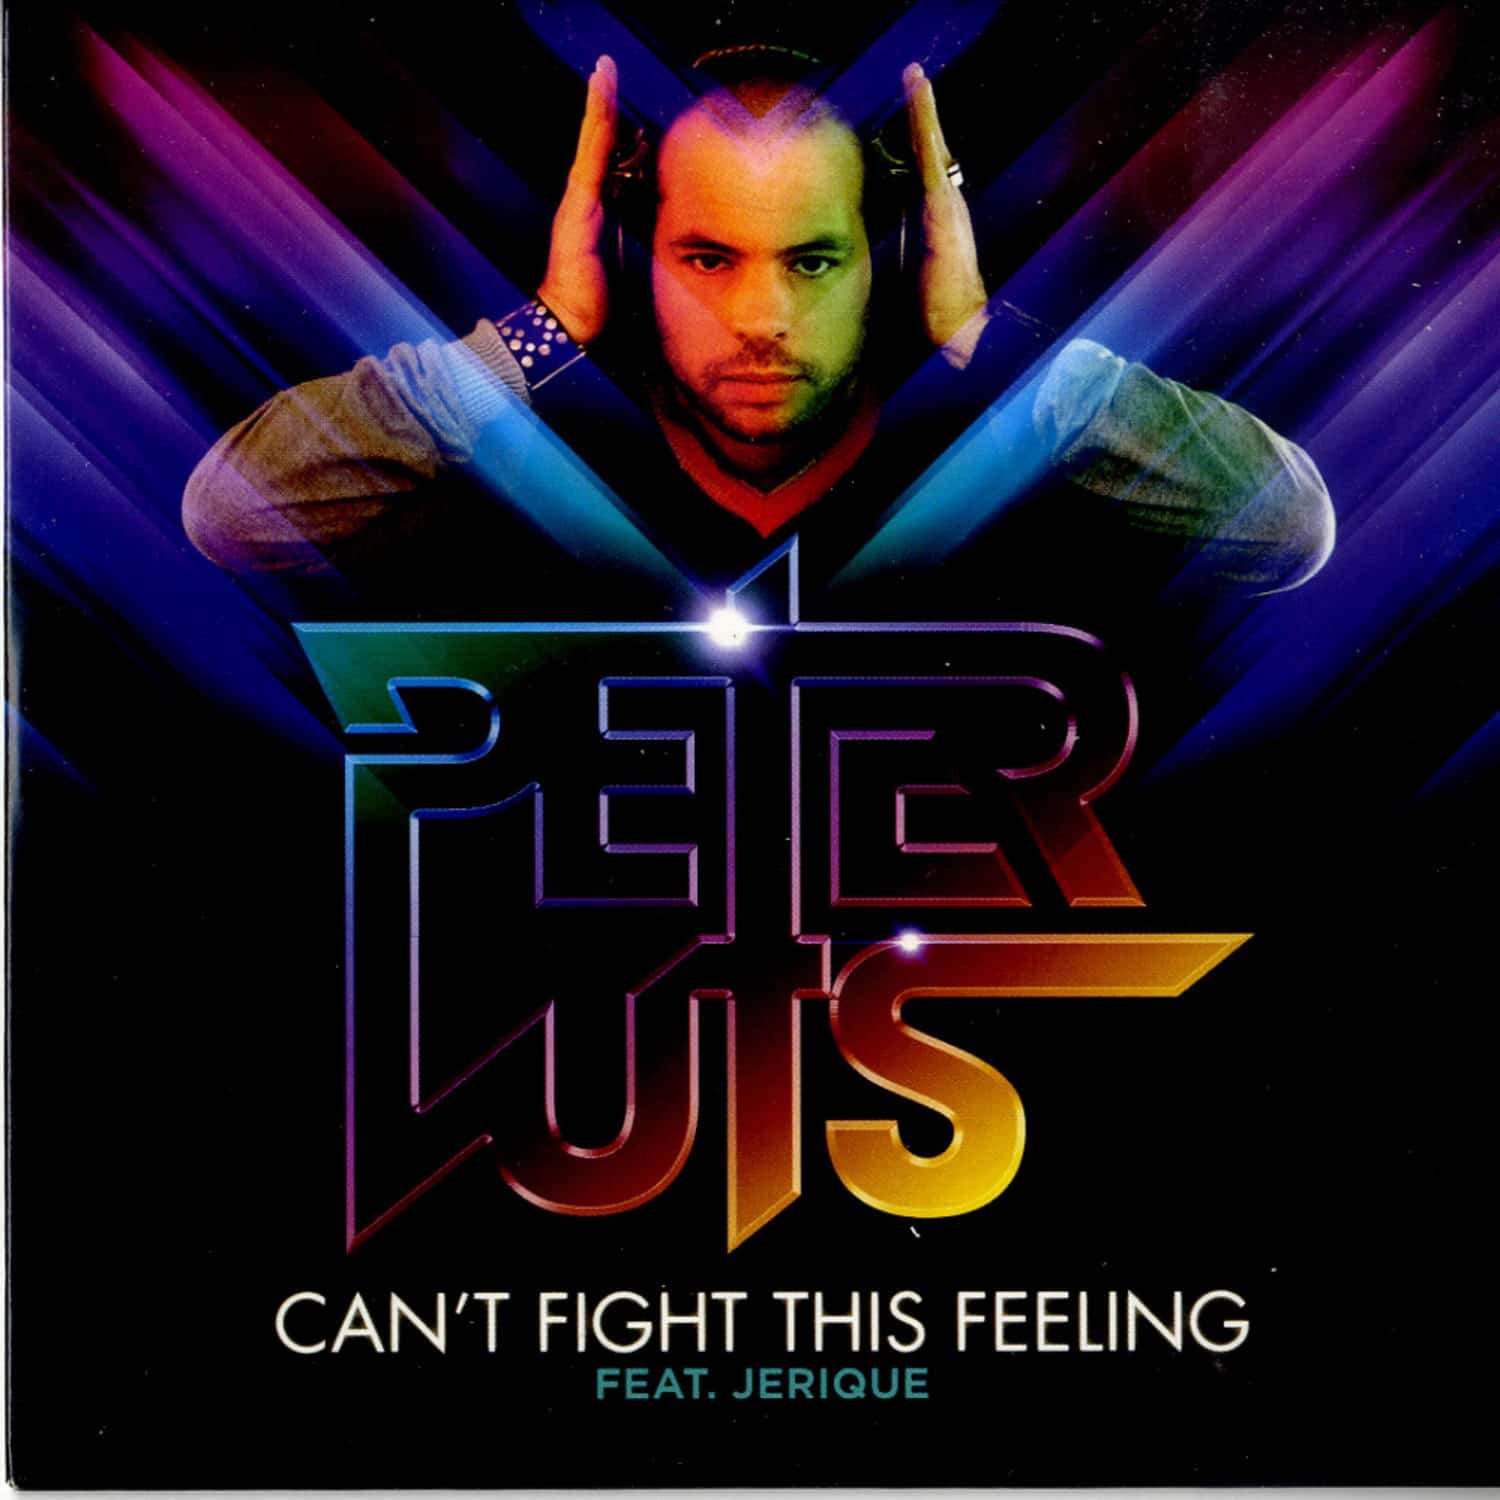 Peter Luts Feat Jerique - CAN T FIGHT THIS FEELING 